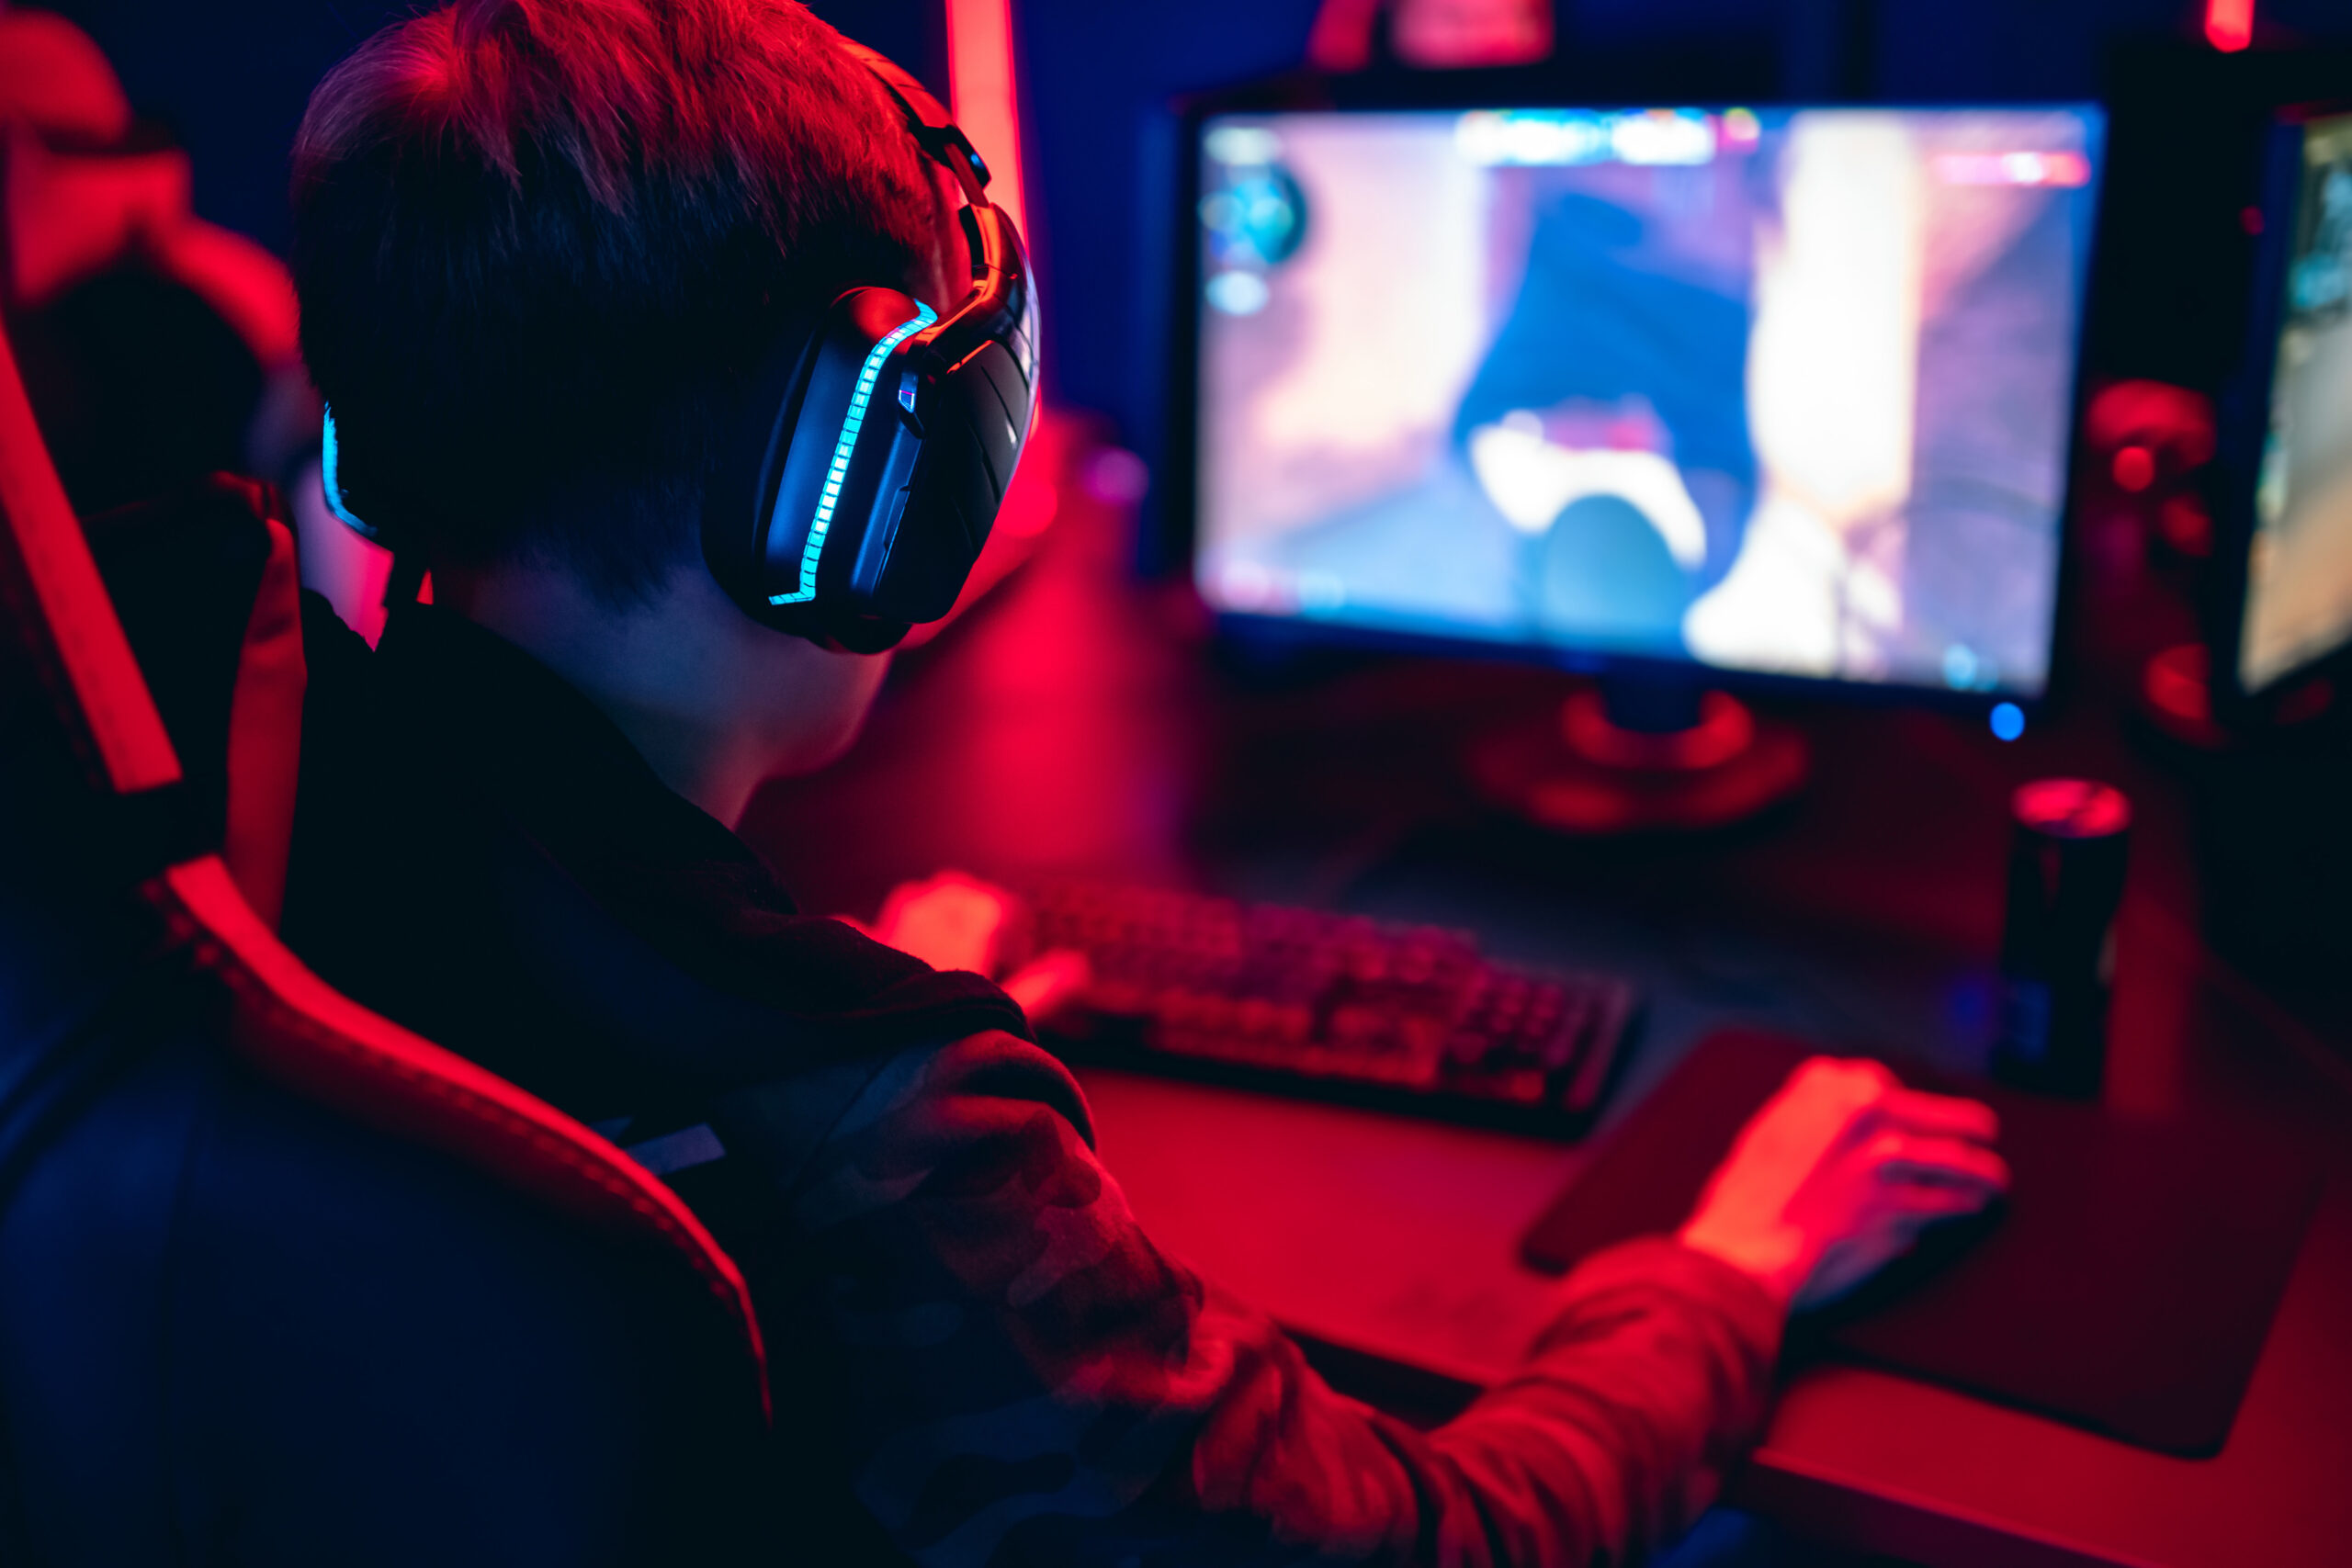 Professional gamer playing online games tournaments pc computer with headphones, Blurred red and blue background